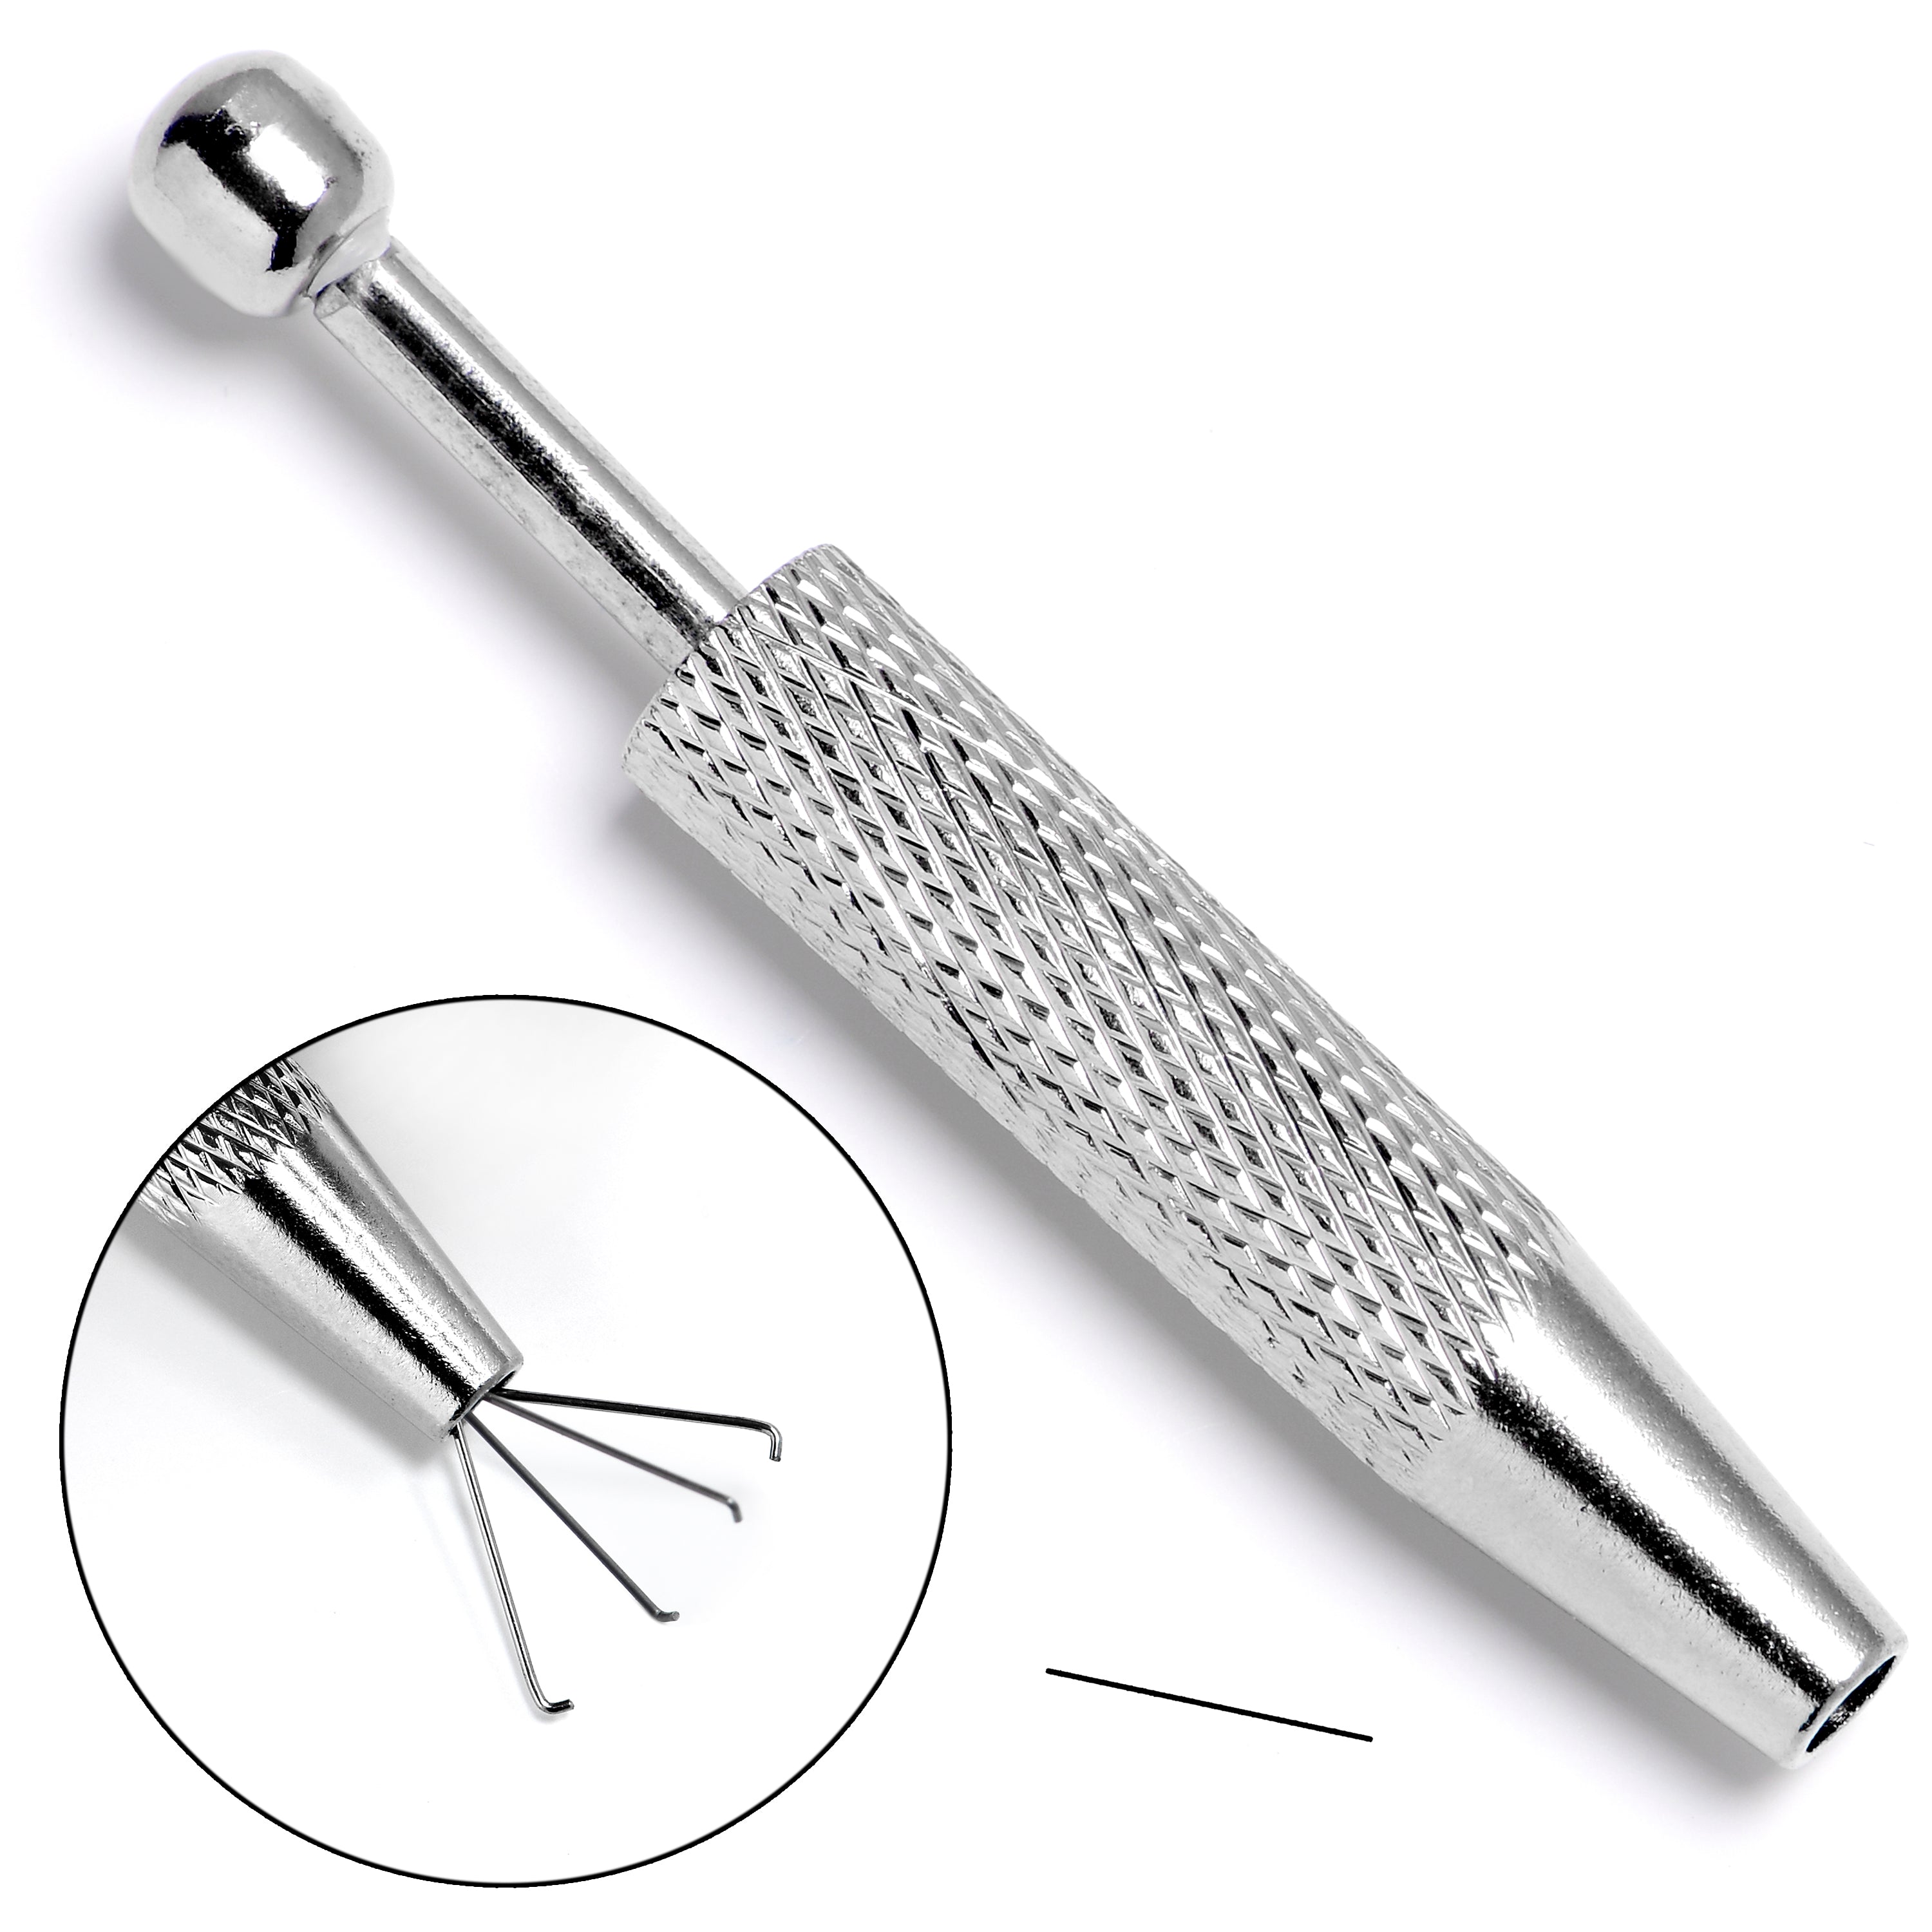 Ball Grabber Piercing Tool Hold 3mm to 15mm Stainless Steel Tool